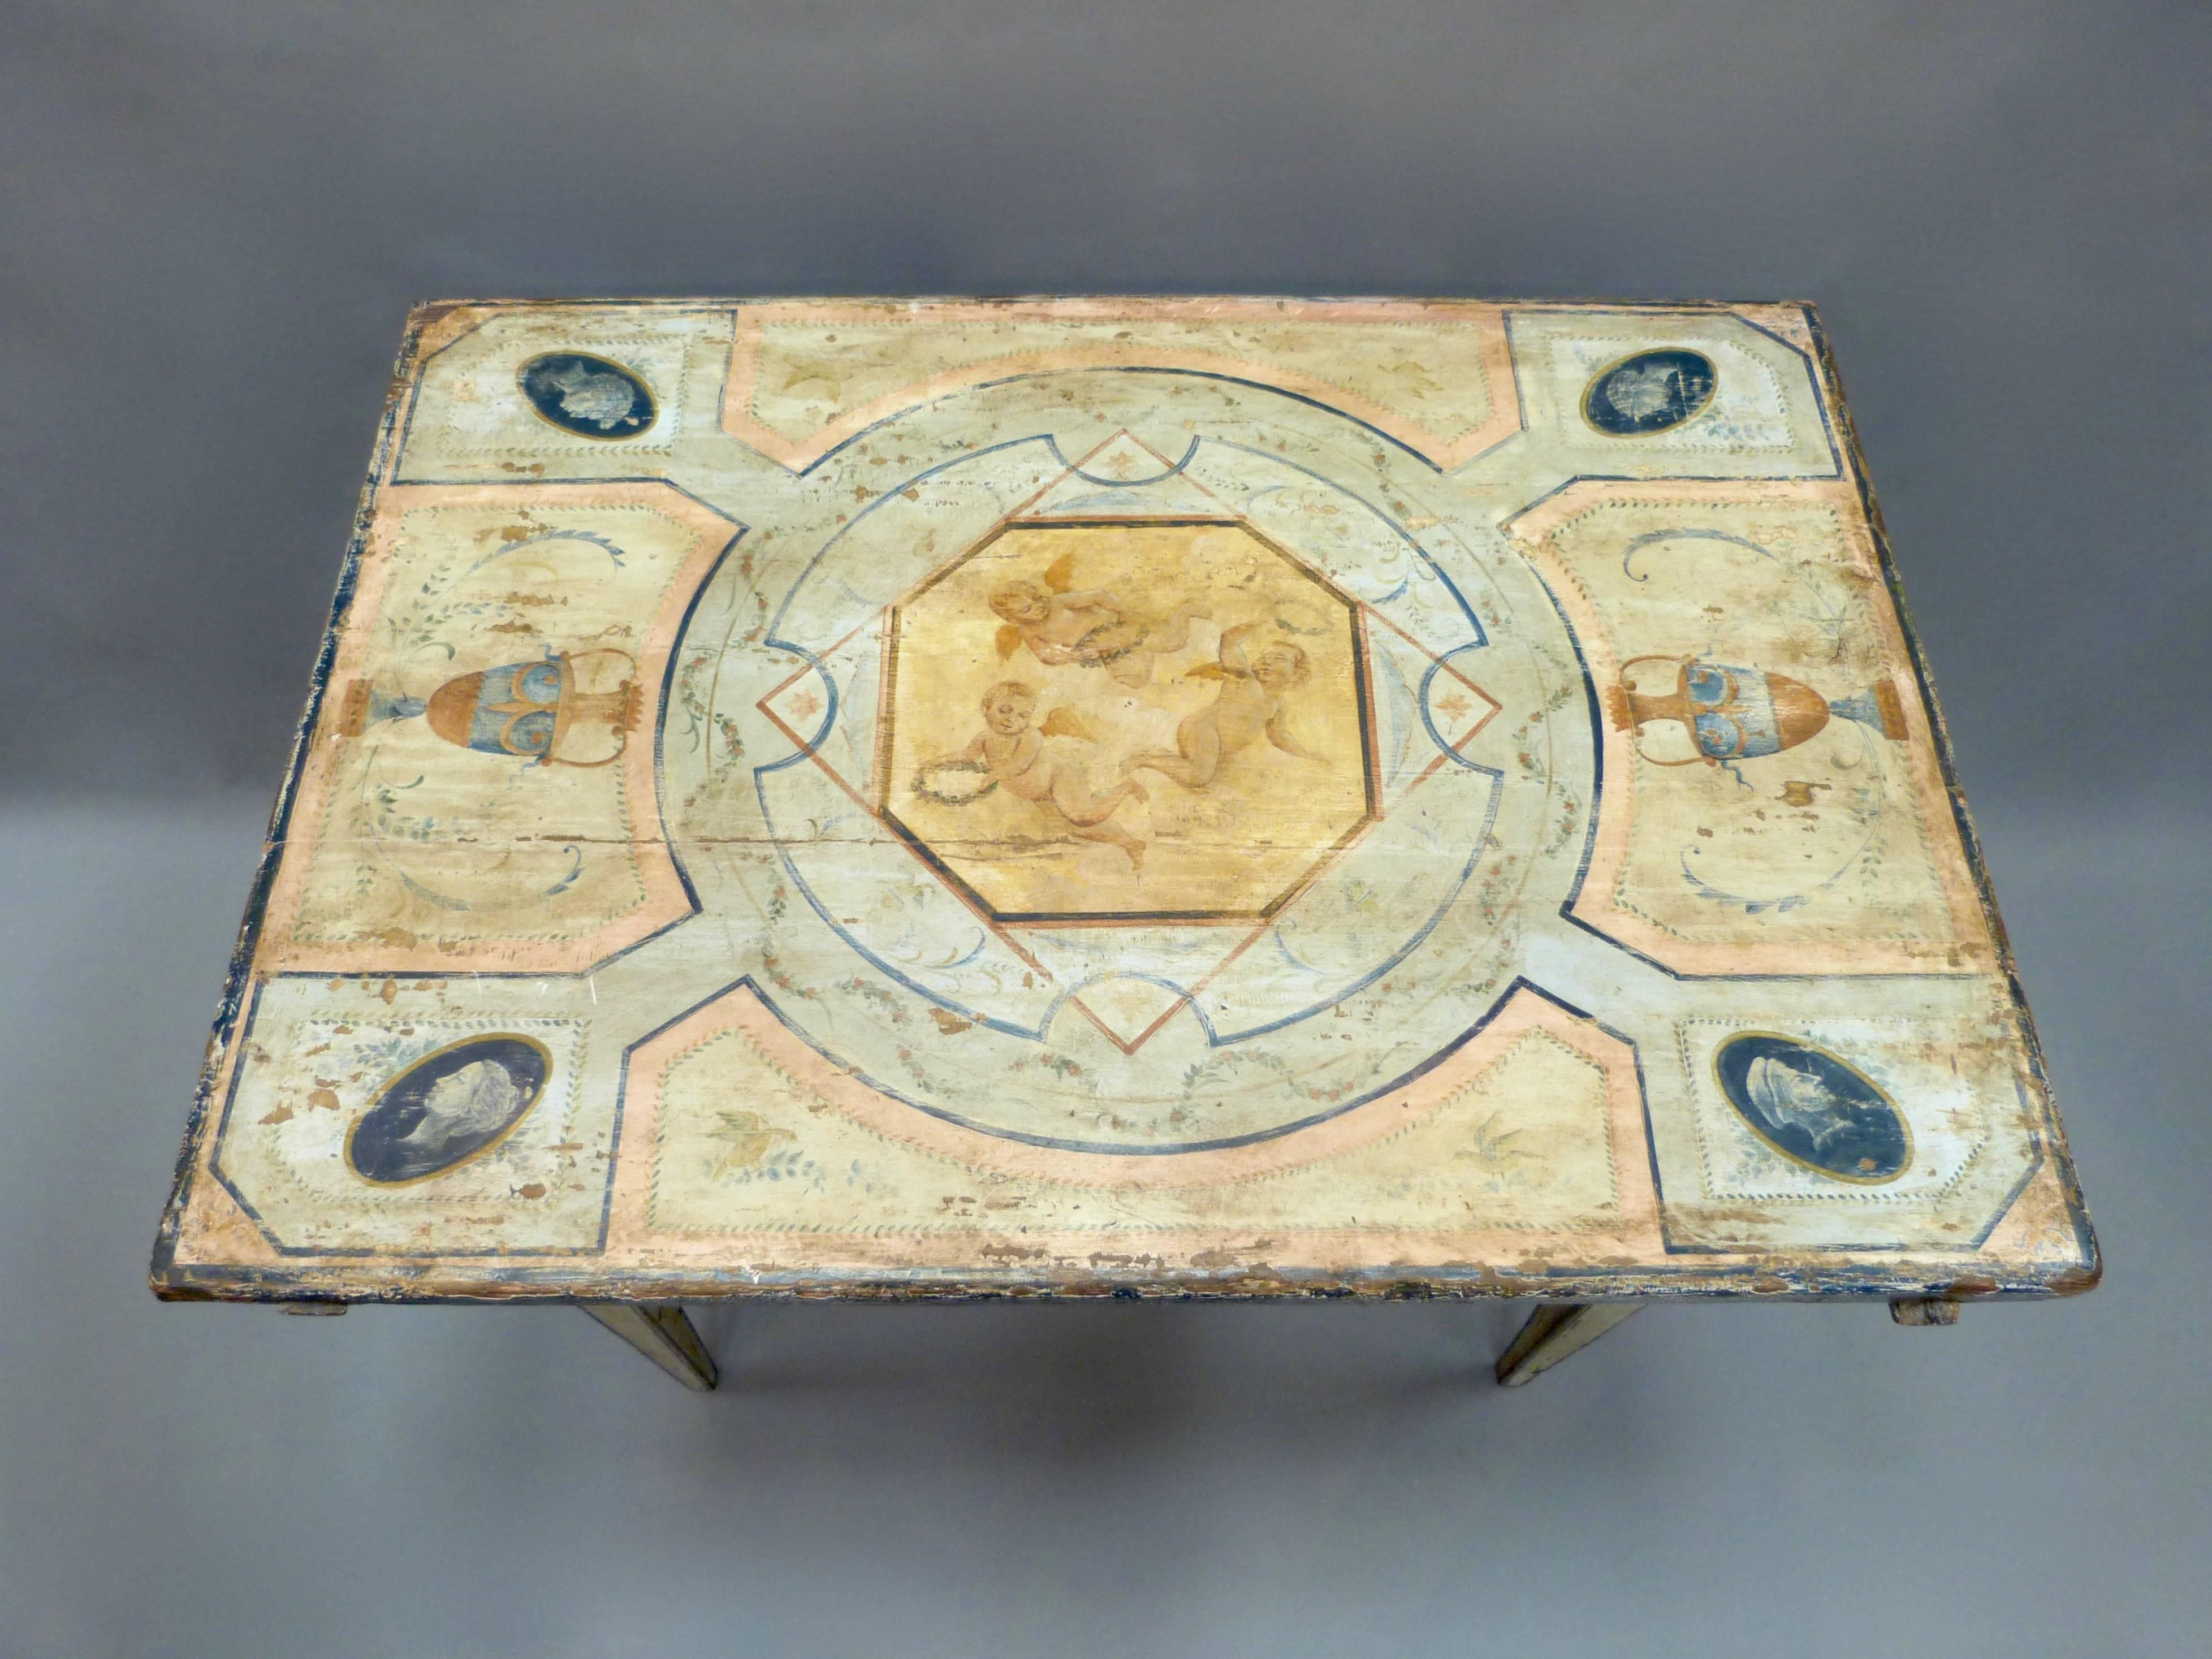 A very decorative 18th century Venetian painted table with a sliding top.